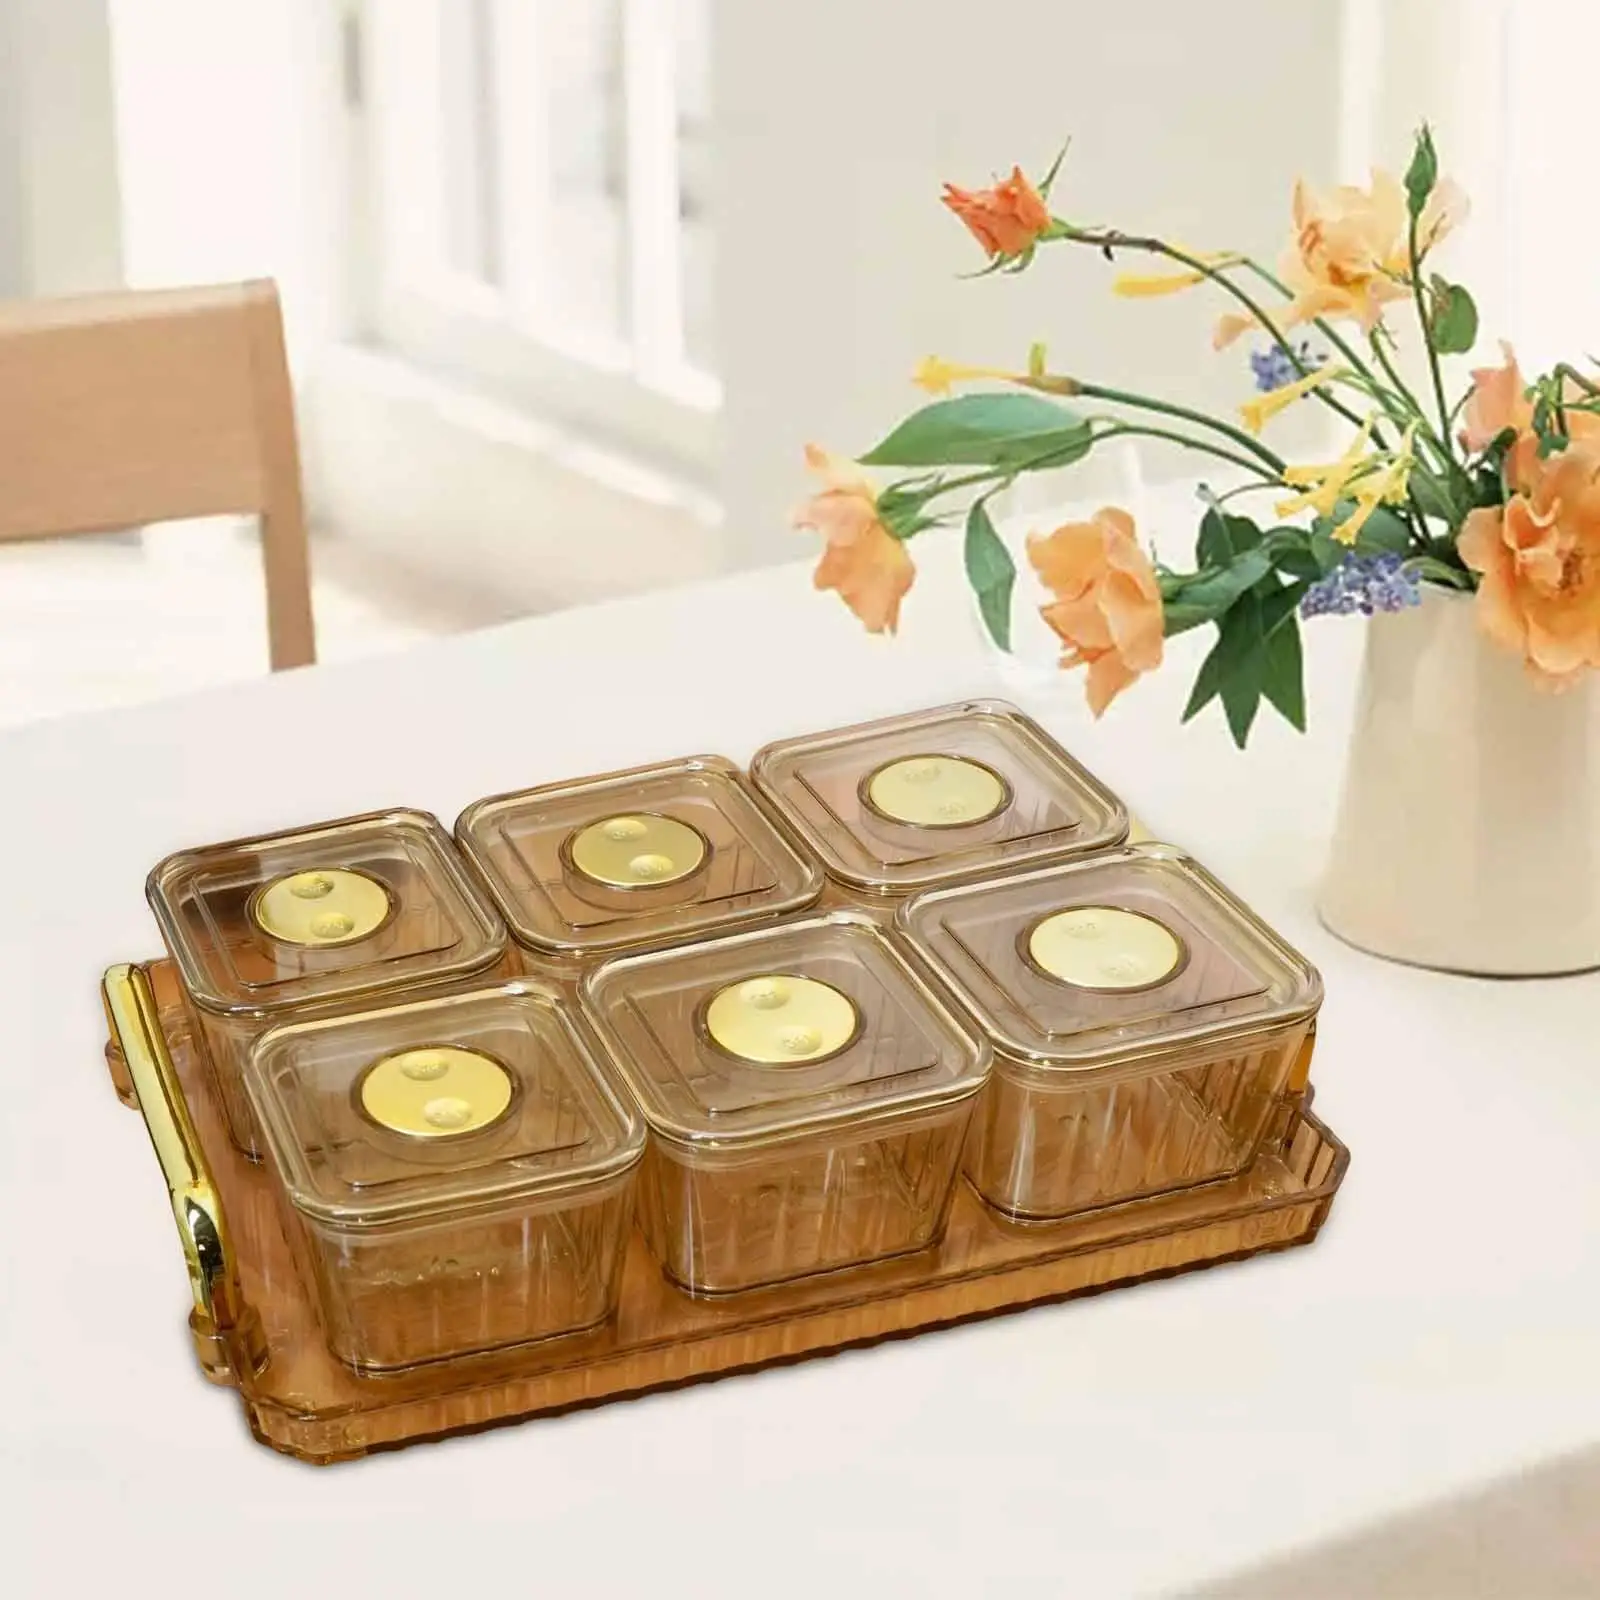 Divided Dried Fruit Tray with Lids 4 Compartment Multifunctional Cookies Jar Serving Tray for Wedding Room Home